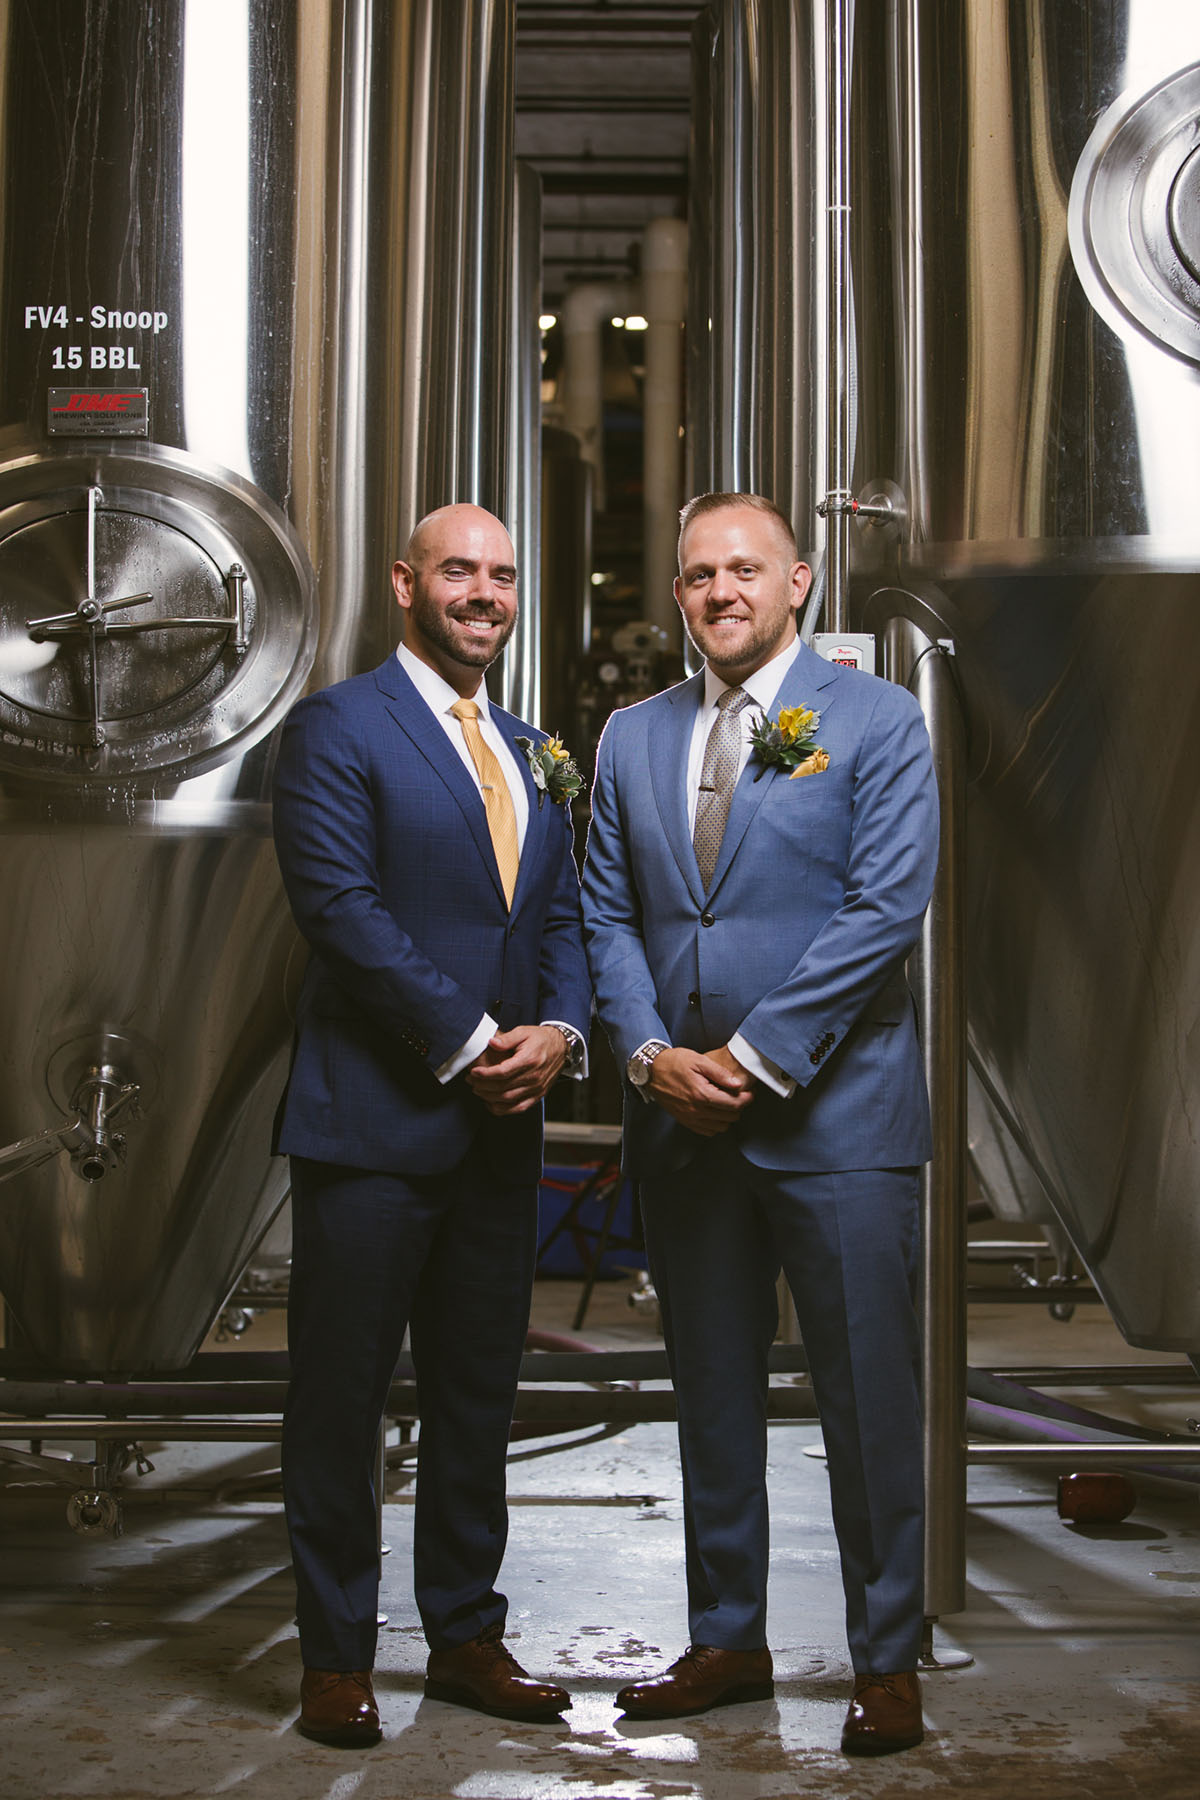 Waterfront brewery elopement at The Piermont in Babylon, New York LGBTQ+ weddings two grooms gay wedding succulents beach terrariums blue tuxedos